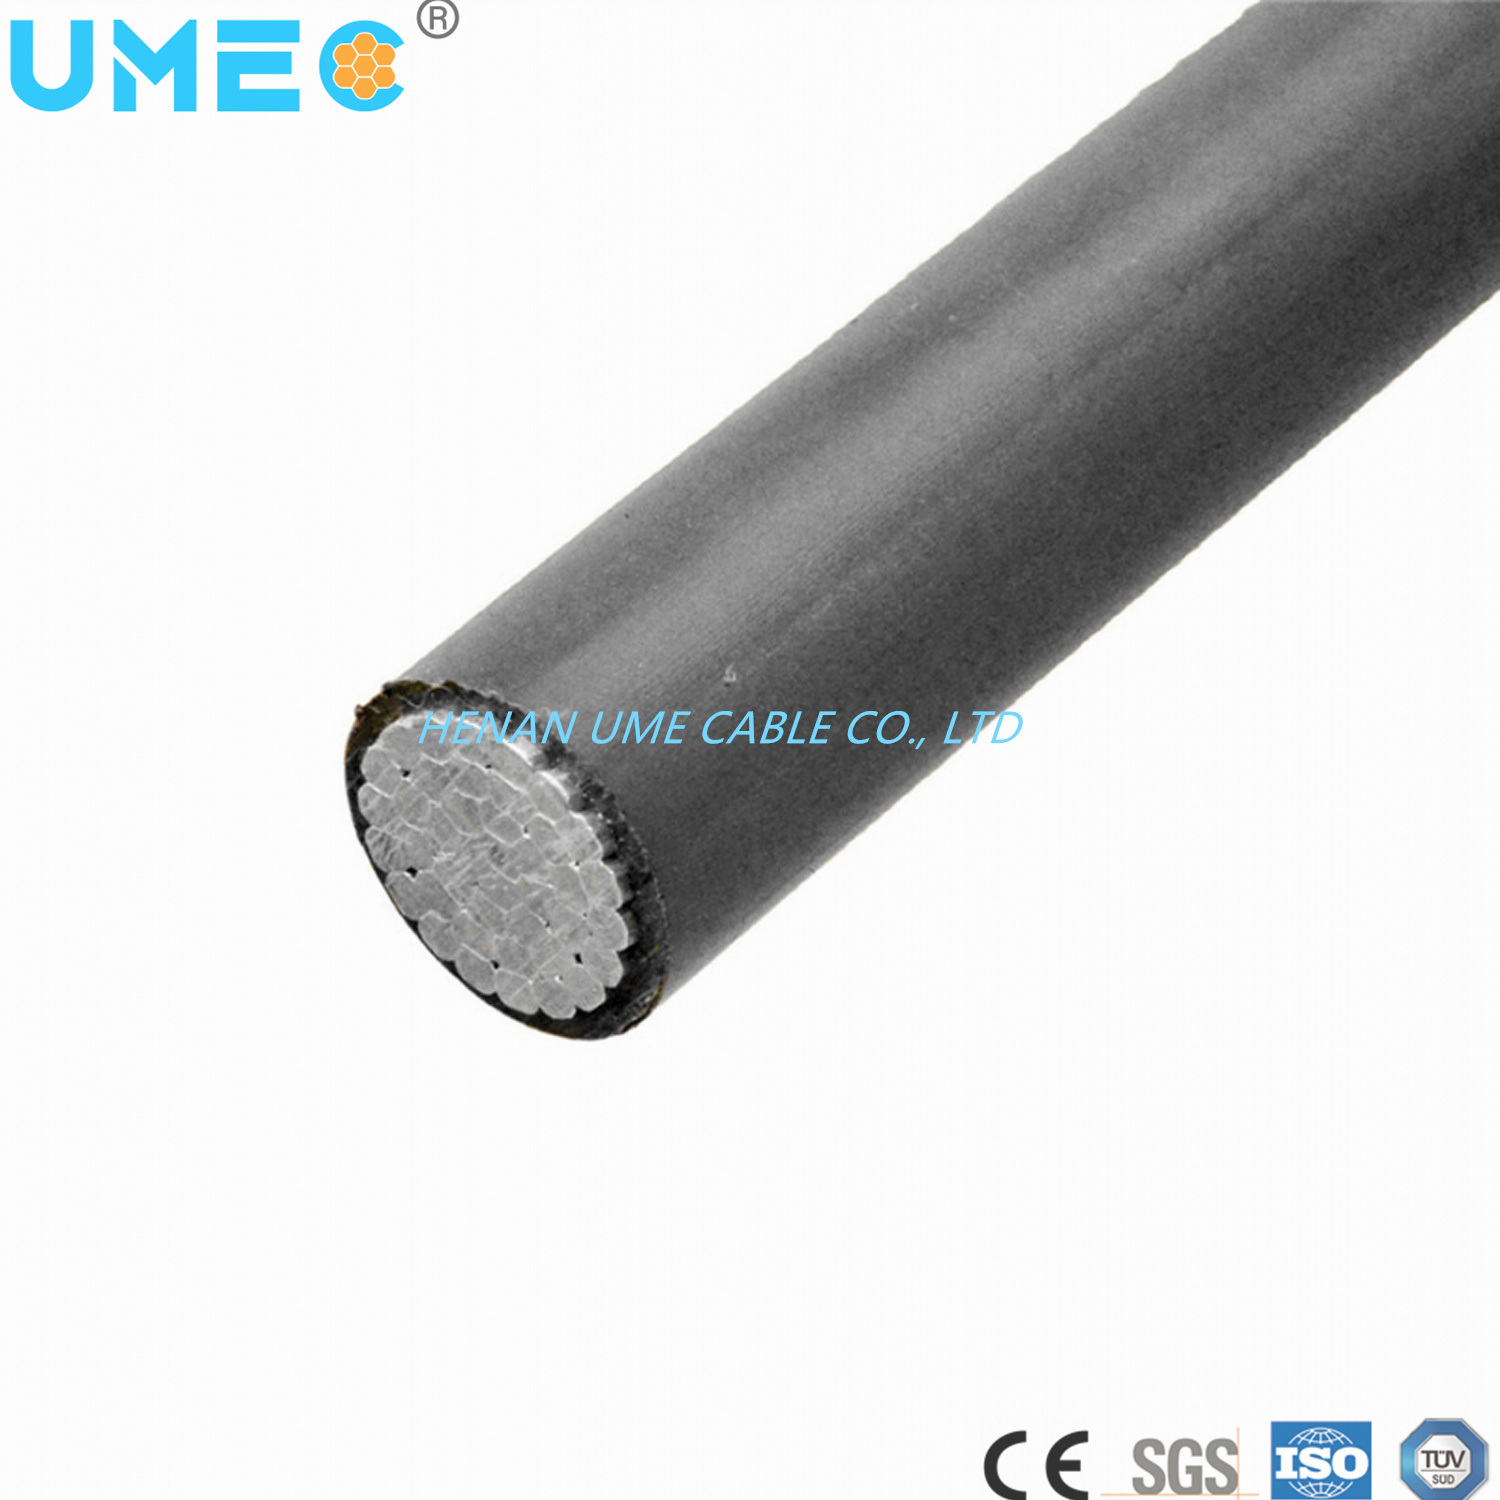 AA-8000 Al-Alloy Conductor Special Cable Xhhw-2 Cable